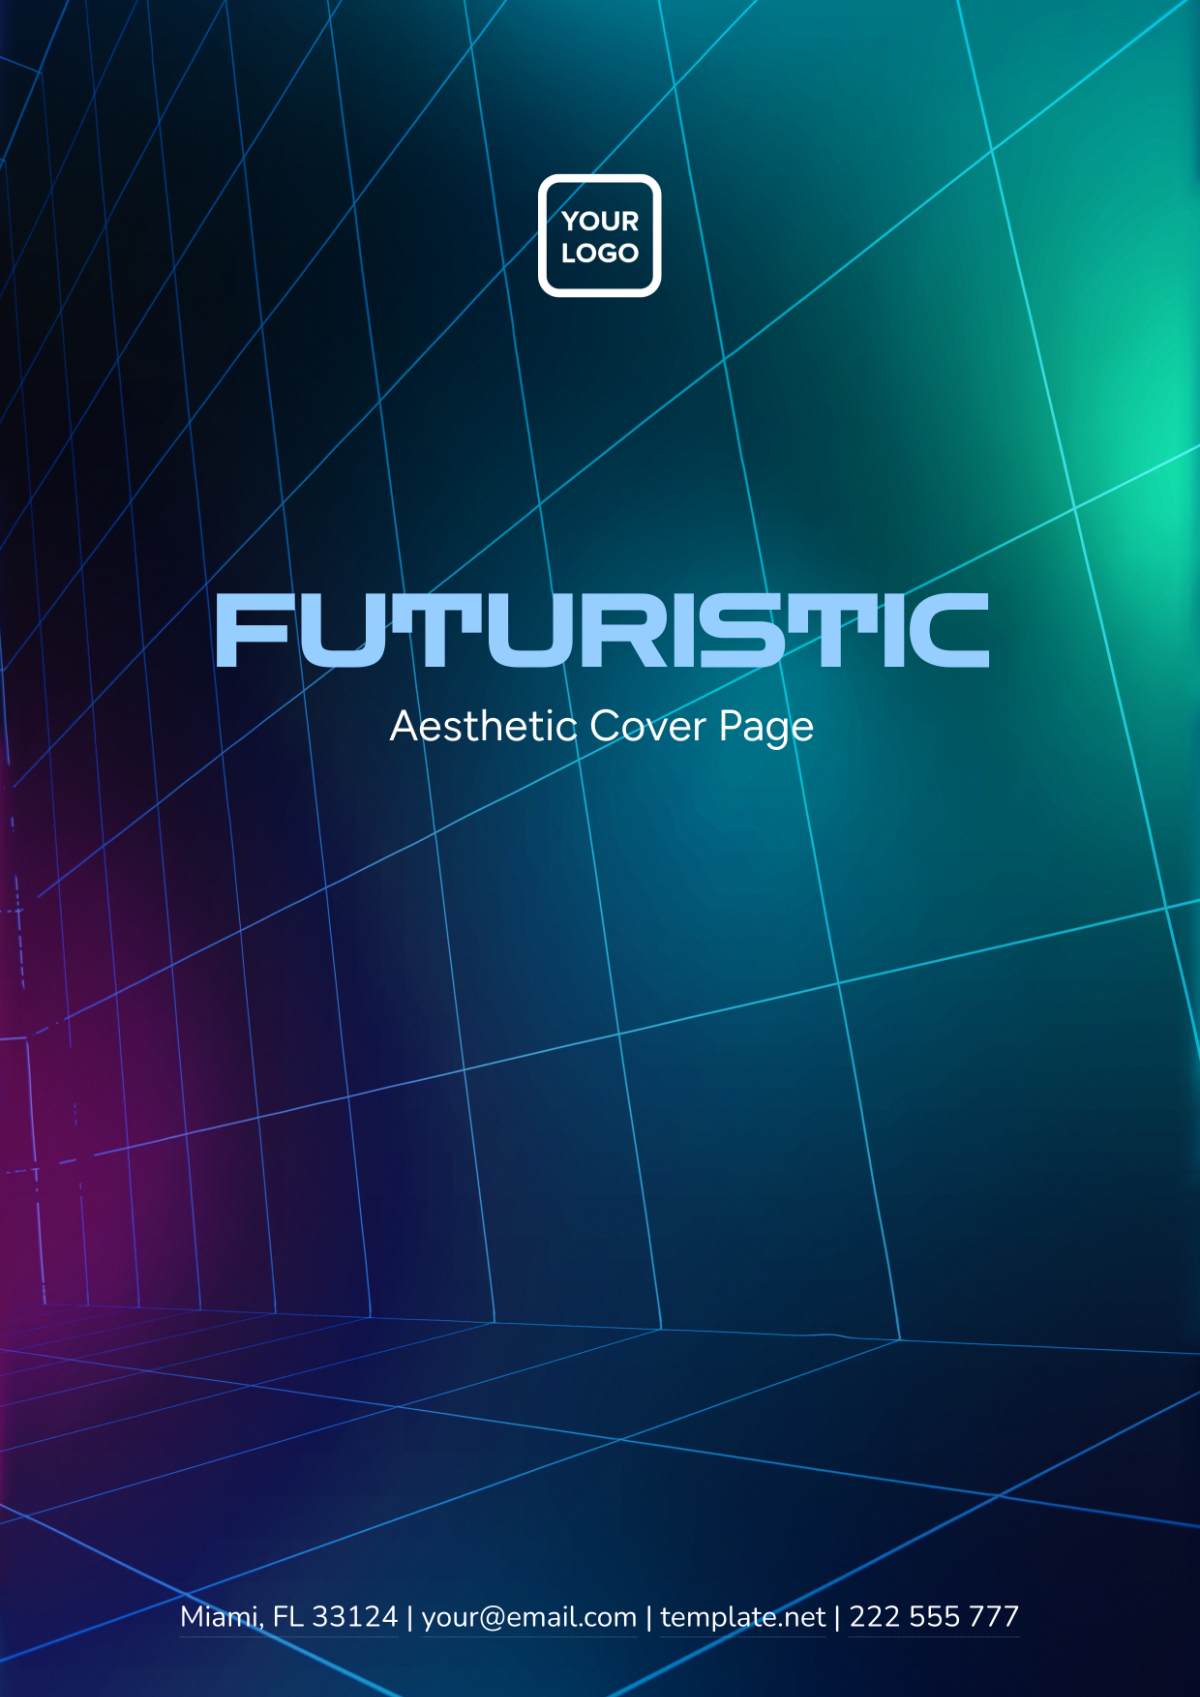 Futuristic Aesthetic Cover Page Template